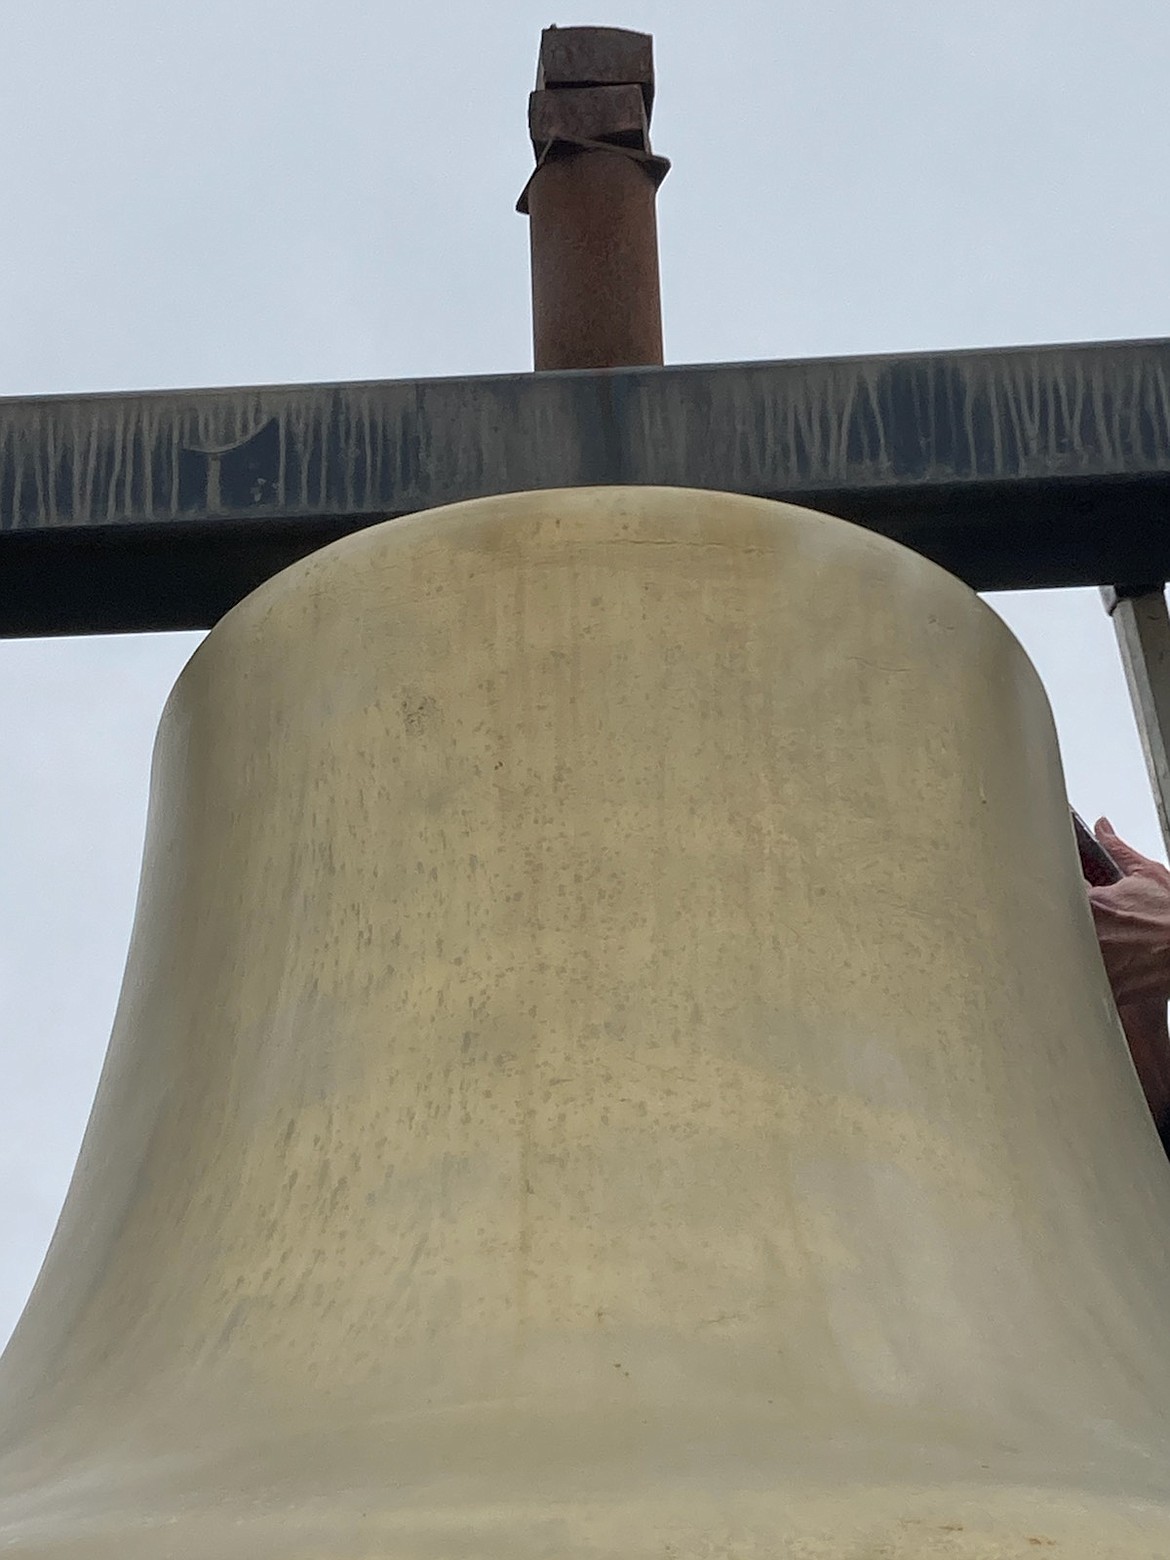 A closeup of the old Sandpoint City Hall bell.